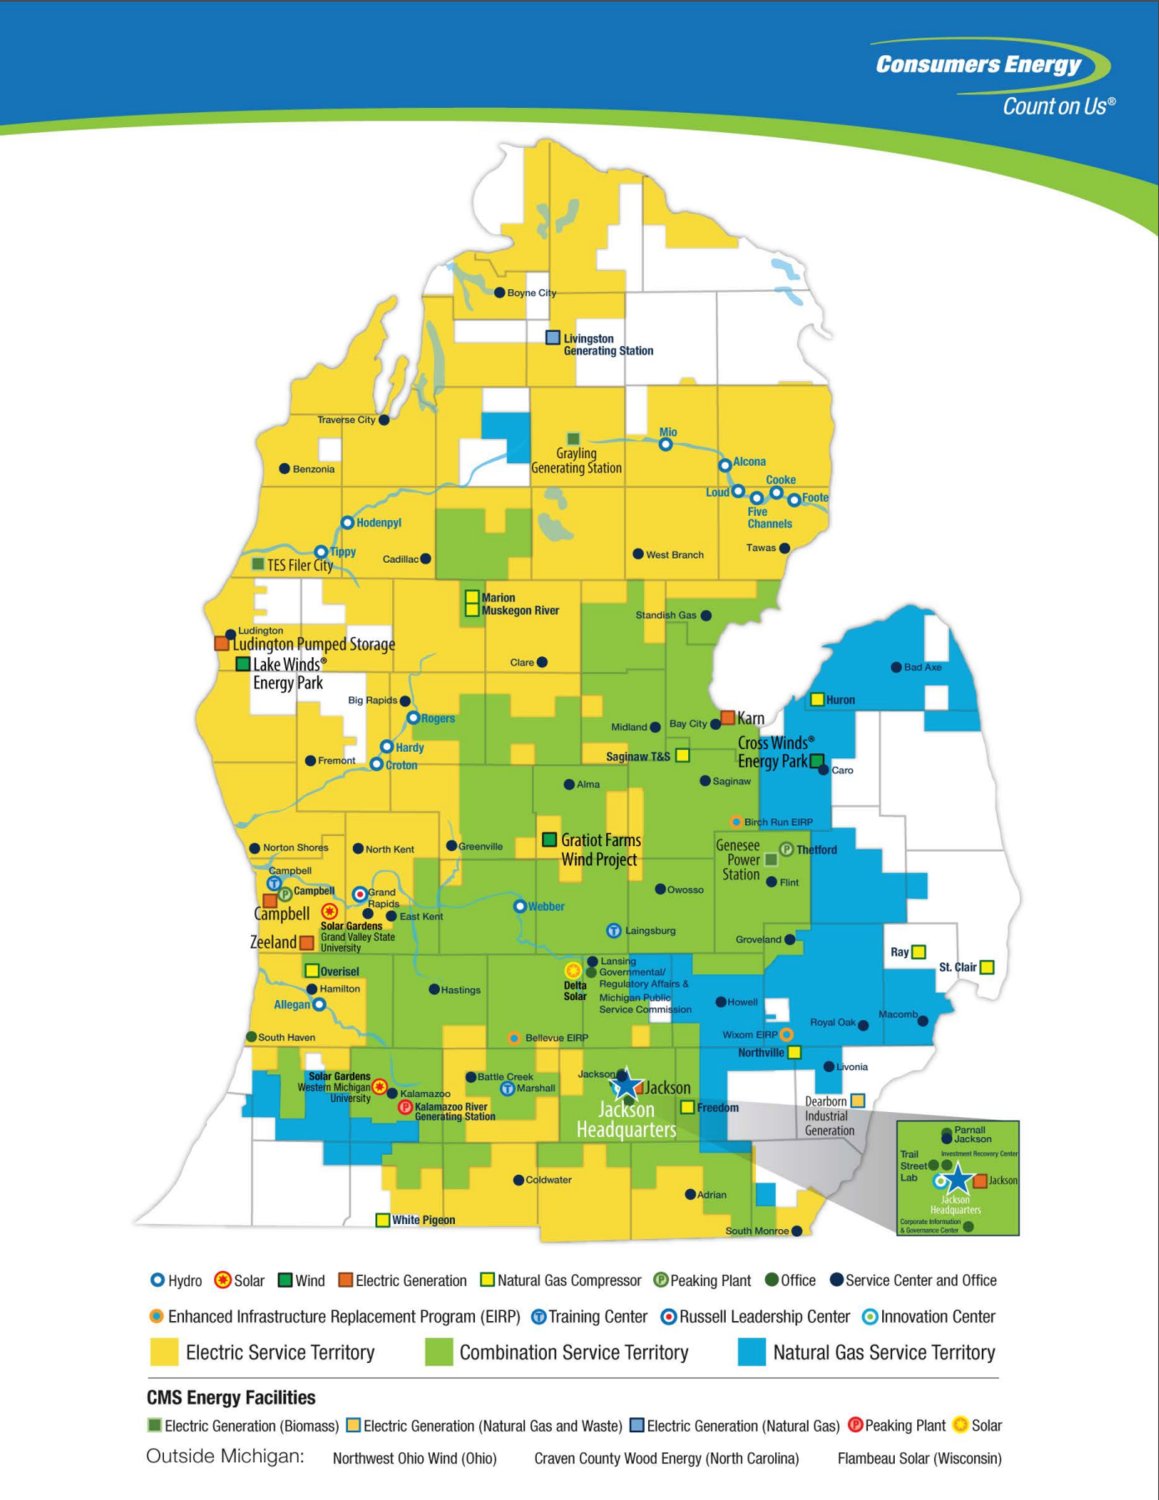 Consumers Energy service areas for natural gas, electricity or both.